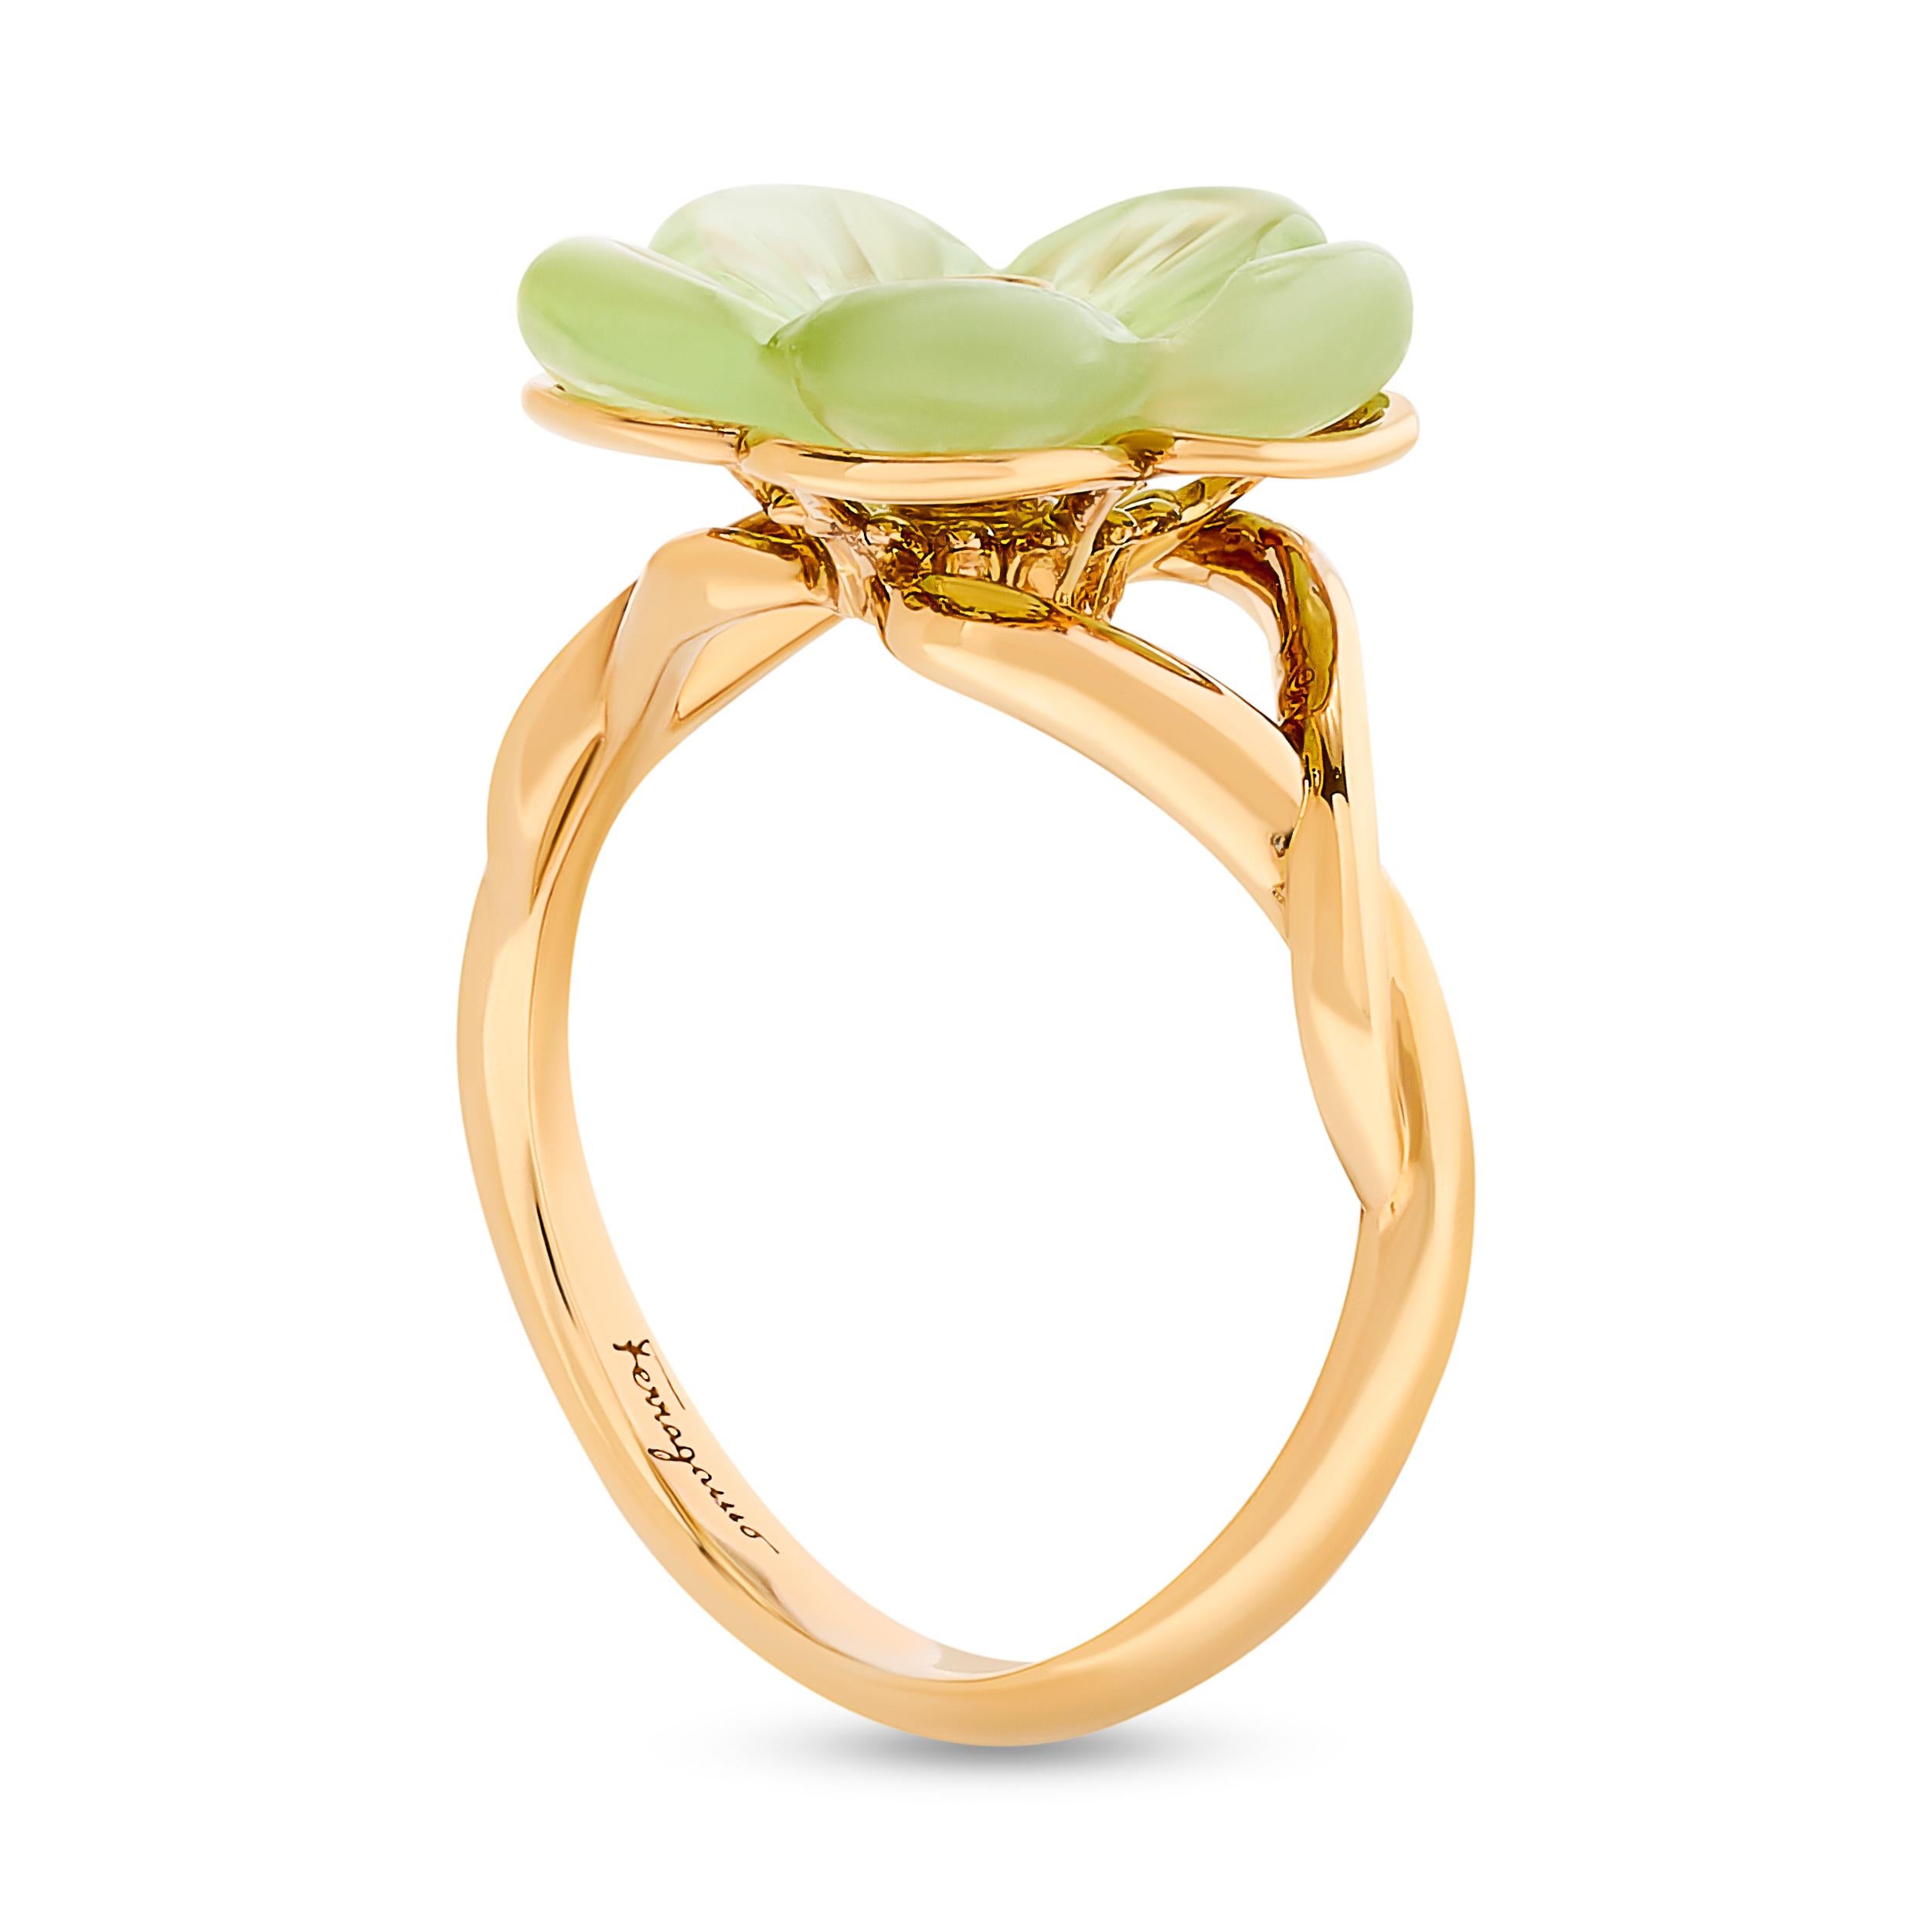 This exquisite 18 karat Ferragamo ring features a captivating floral design with carved, delicate peridot petals that gently curve around a diamond center.
The center round diamond weighs approximately 0.04 carat with an H color and VS clarity